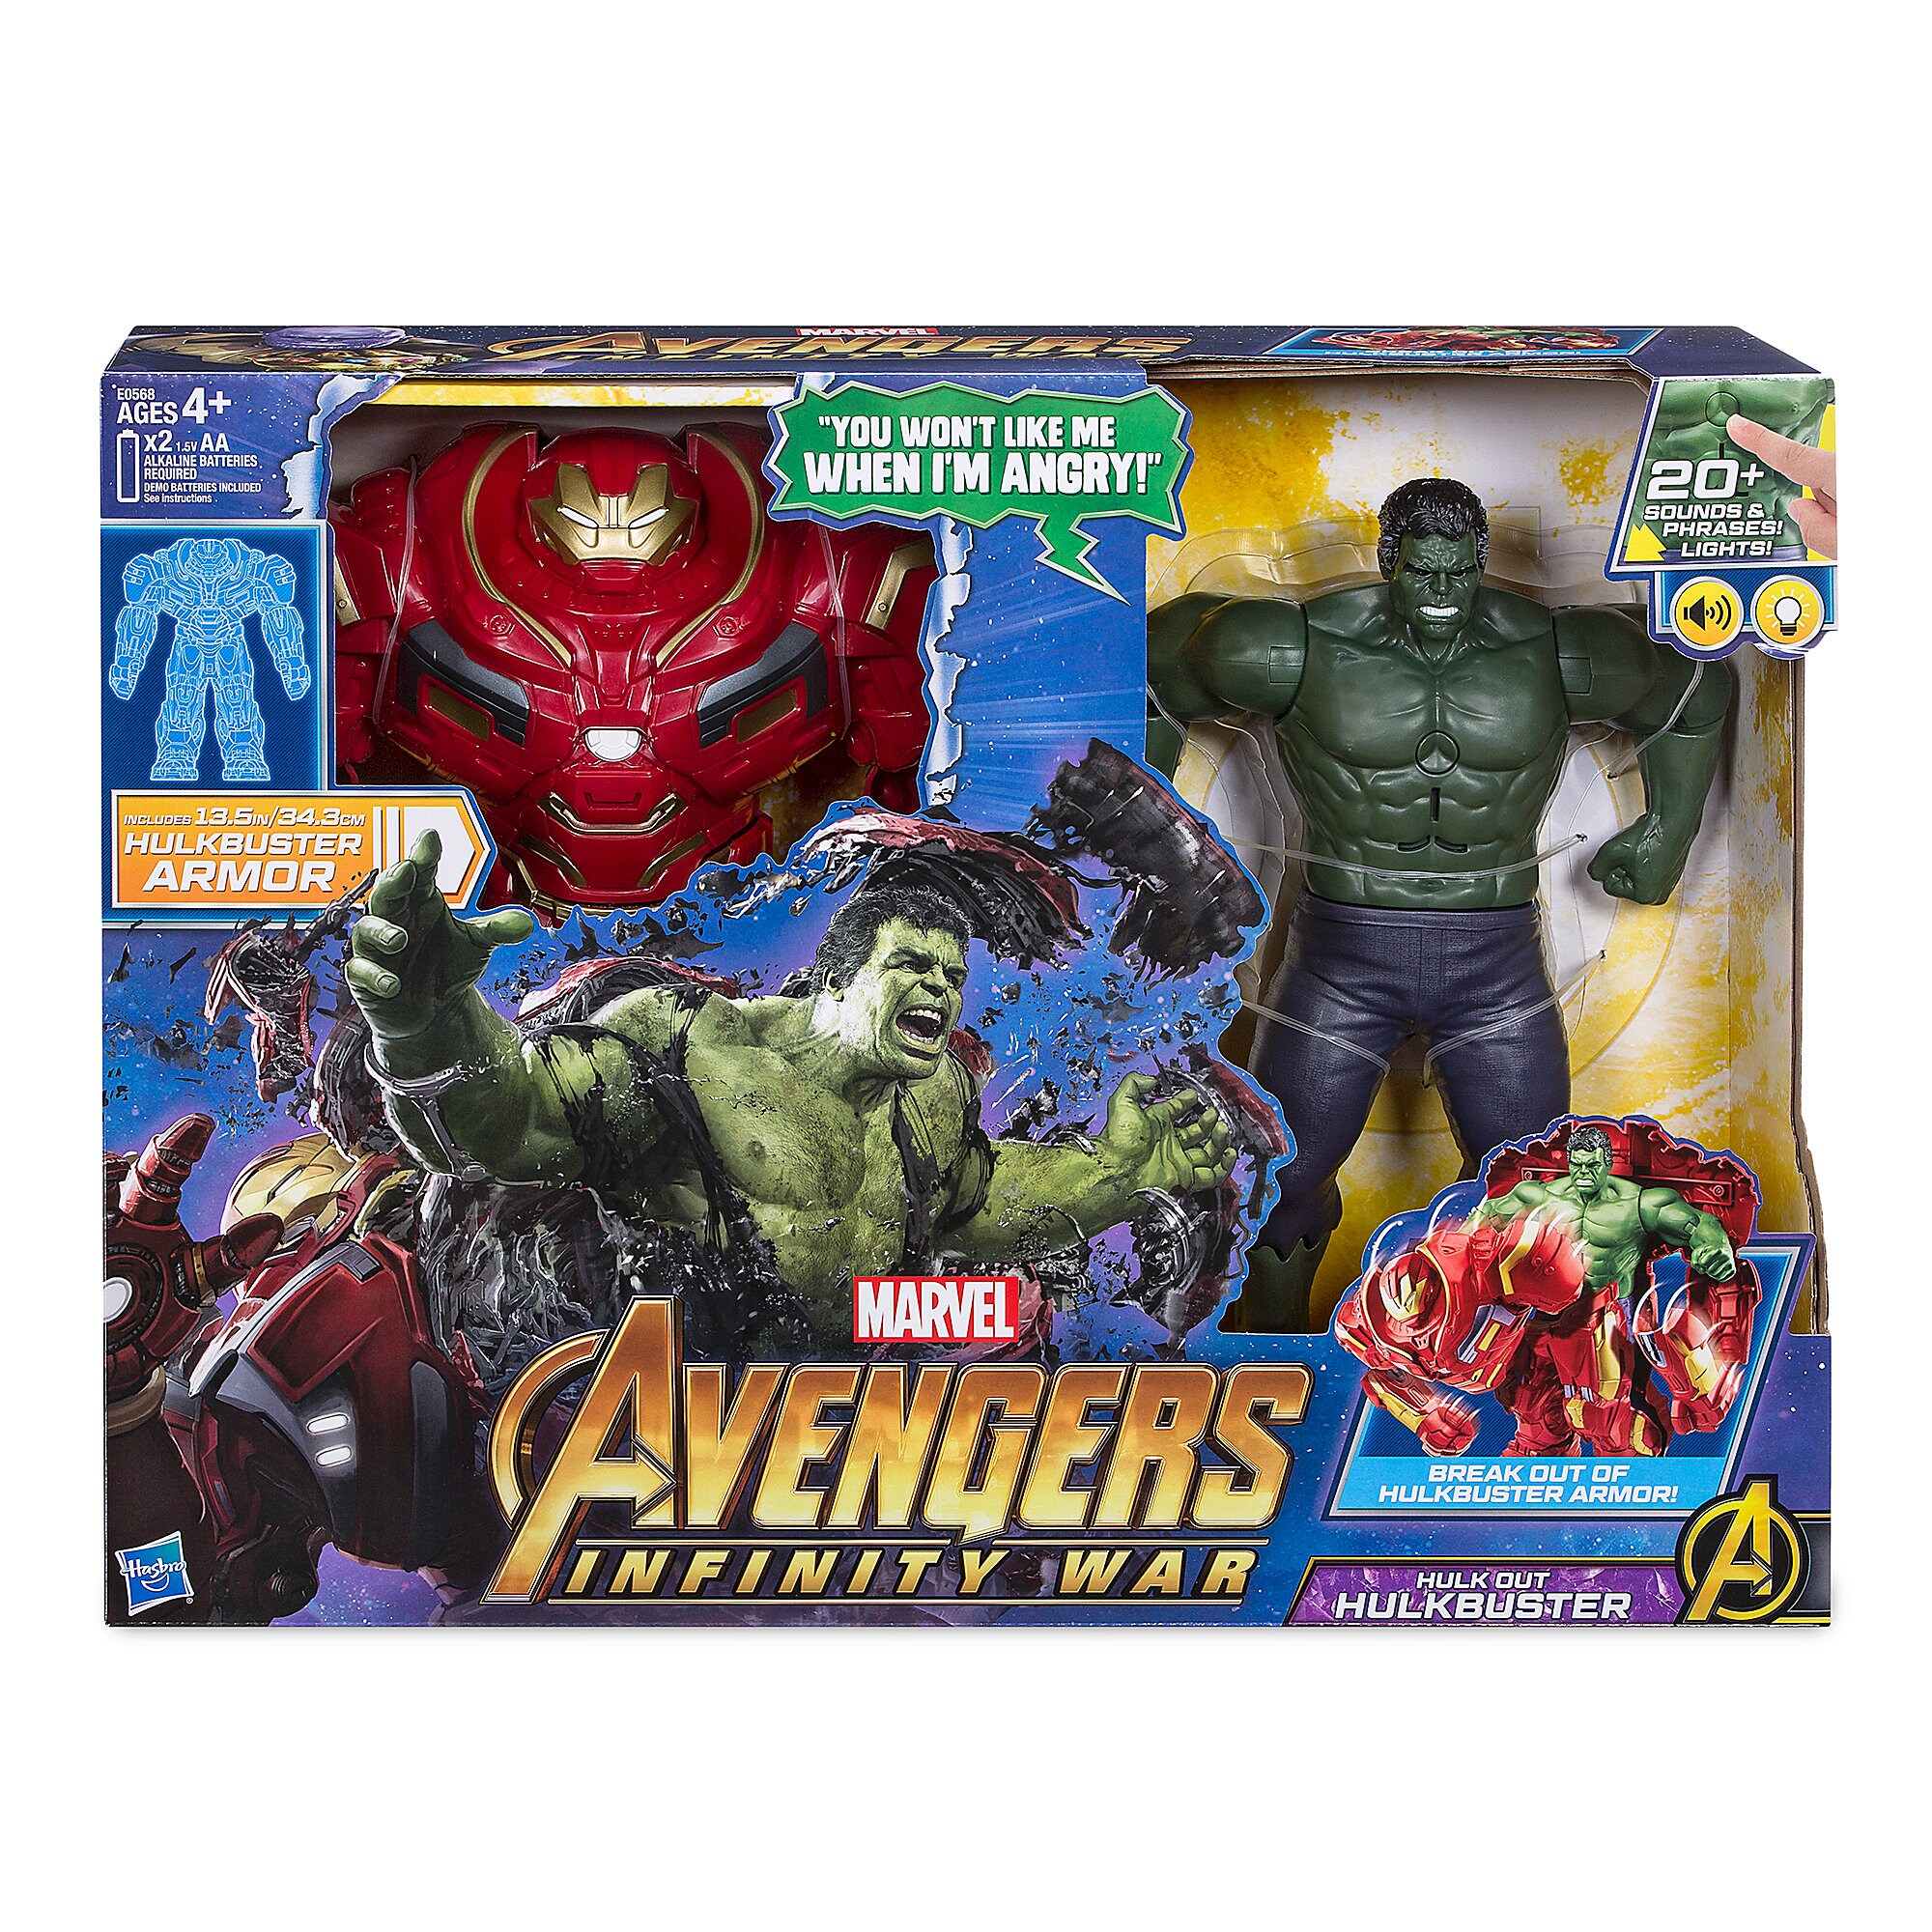 Hulk Out Hulkbuster Action Figure by Hasbro - Marvel's Avengers: Infinity War